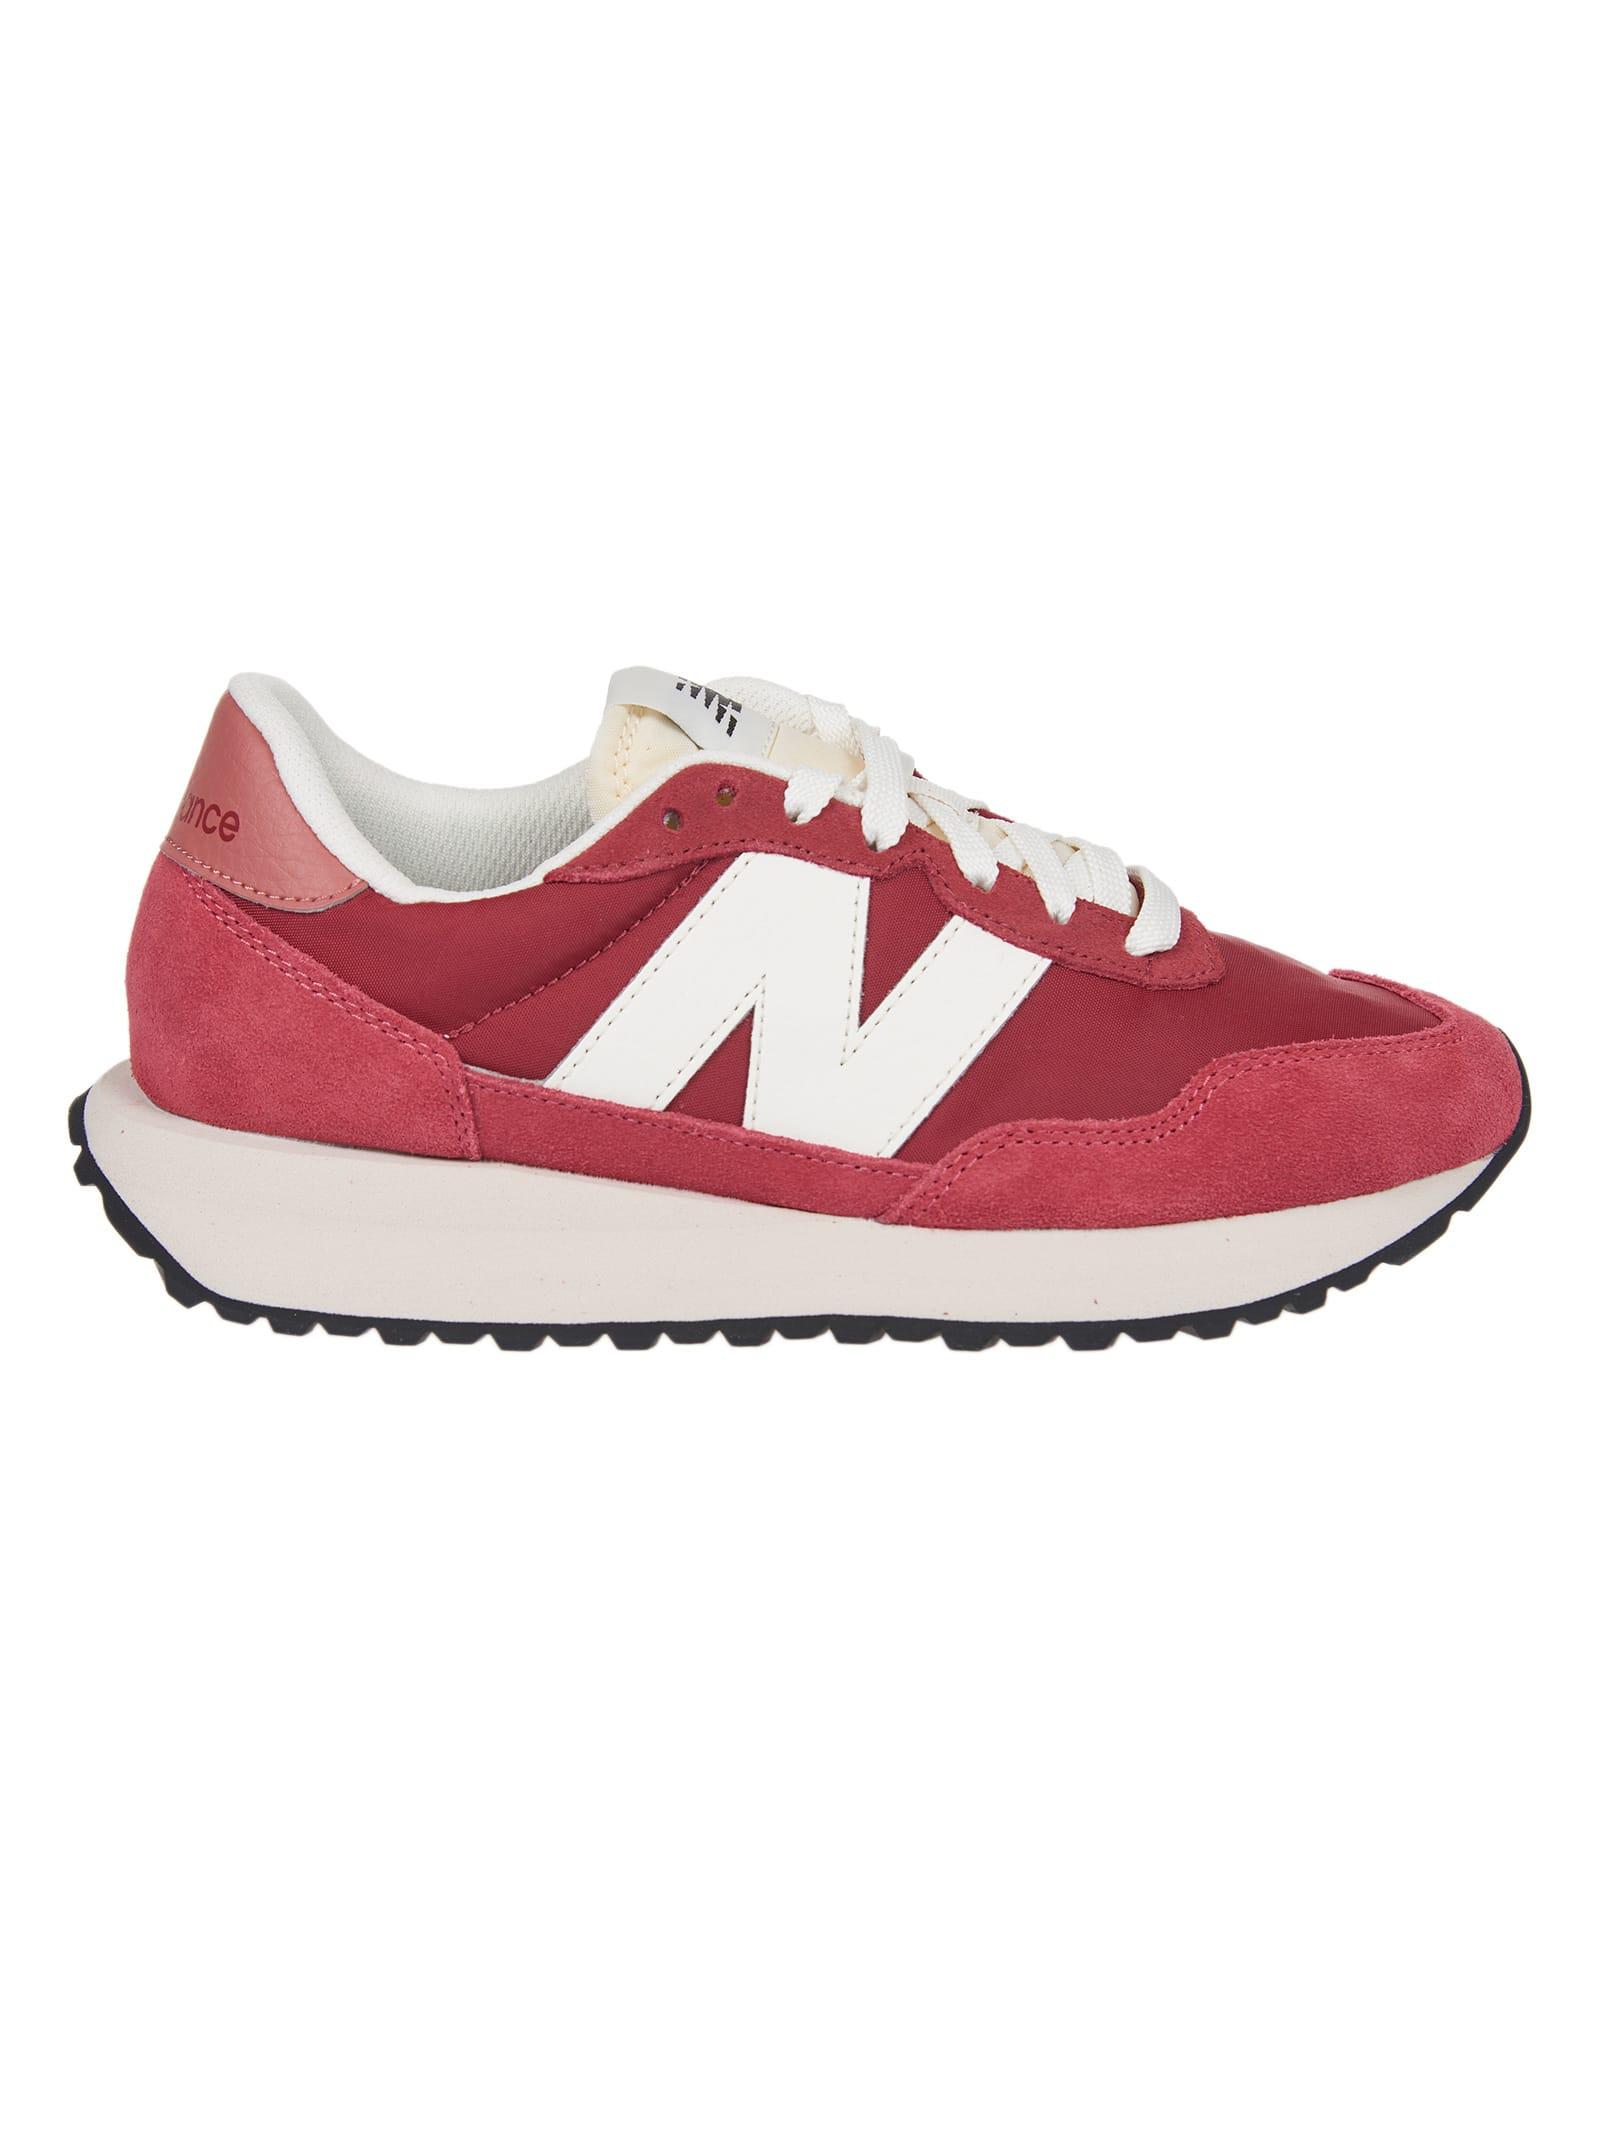 New Balance Suede 237 Sneakers - Women in Red - Save 37% | Lyst